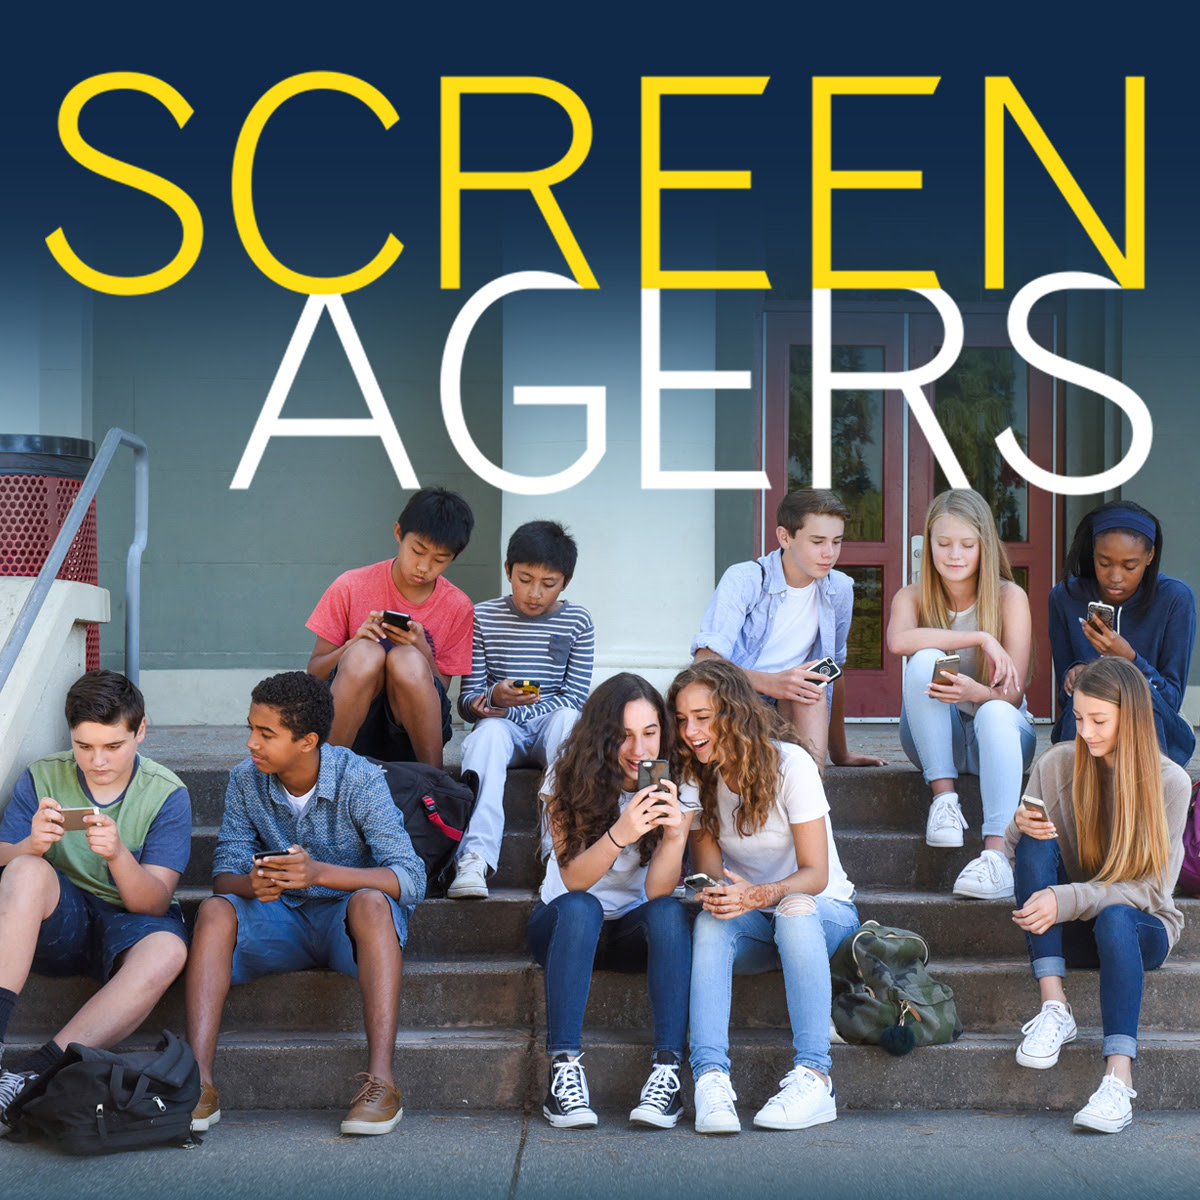 Screenagers Film Presented By The Charlotte Church